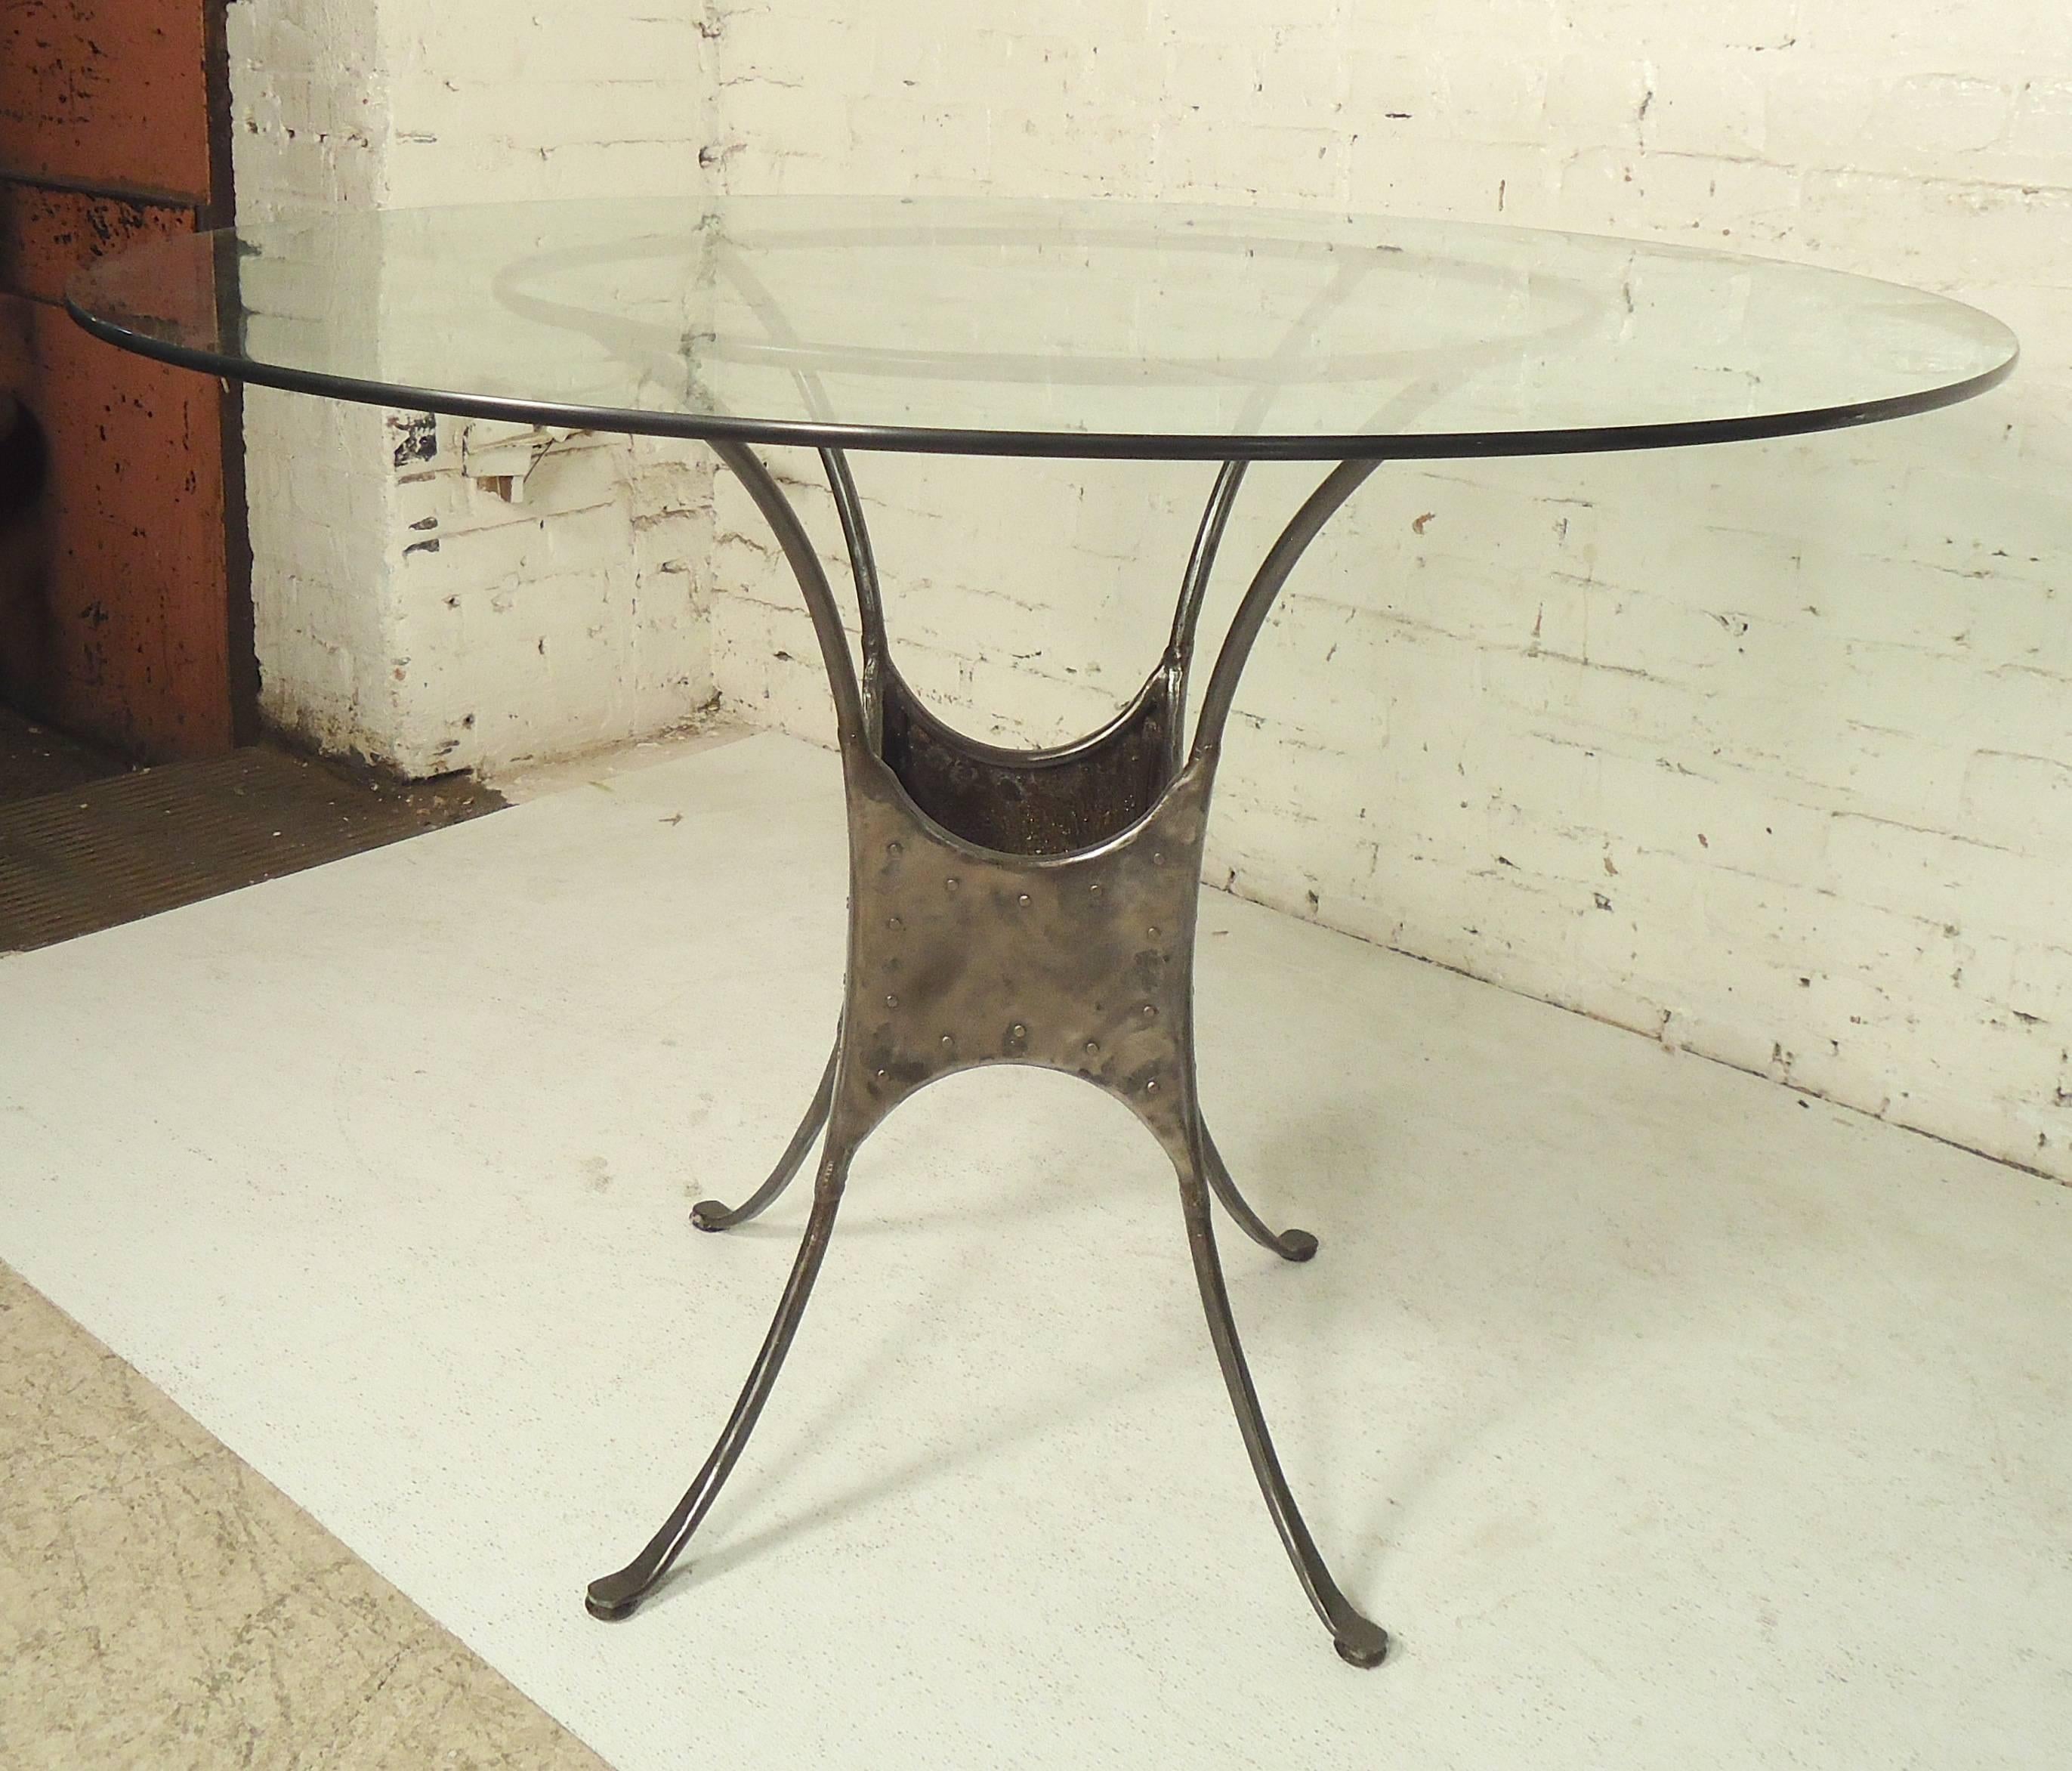 Round glass top dining table with industrial metal base. Metal has been stripped and given a bare metal style finish.

(Please confirm item location NY or NJ with dealer).
 